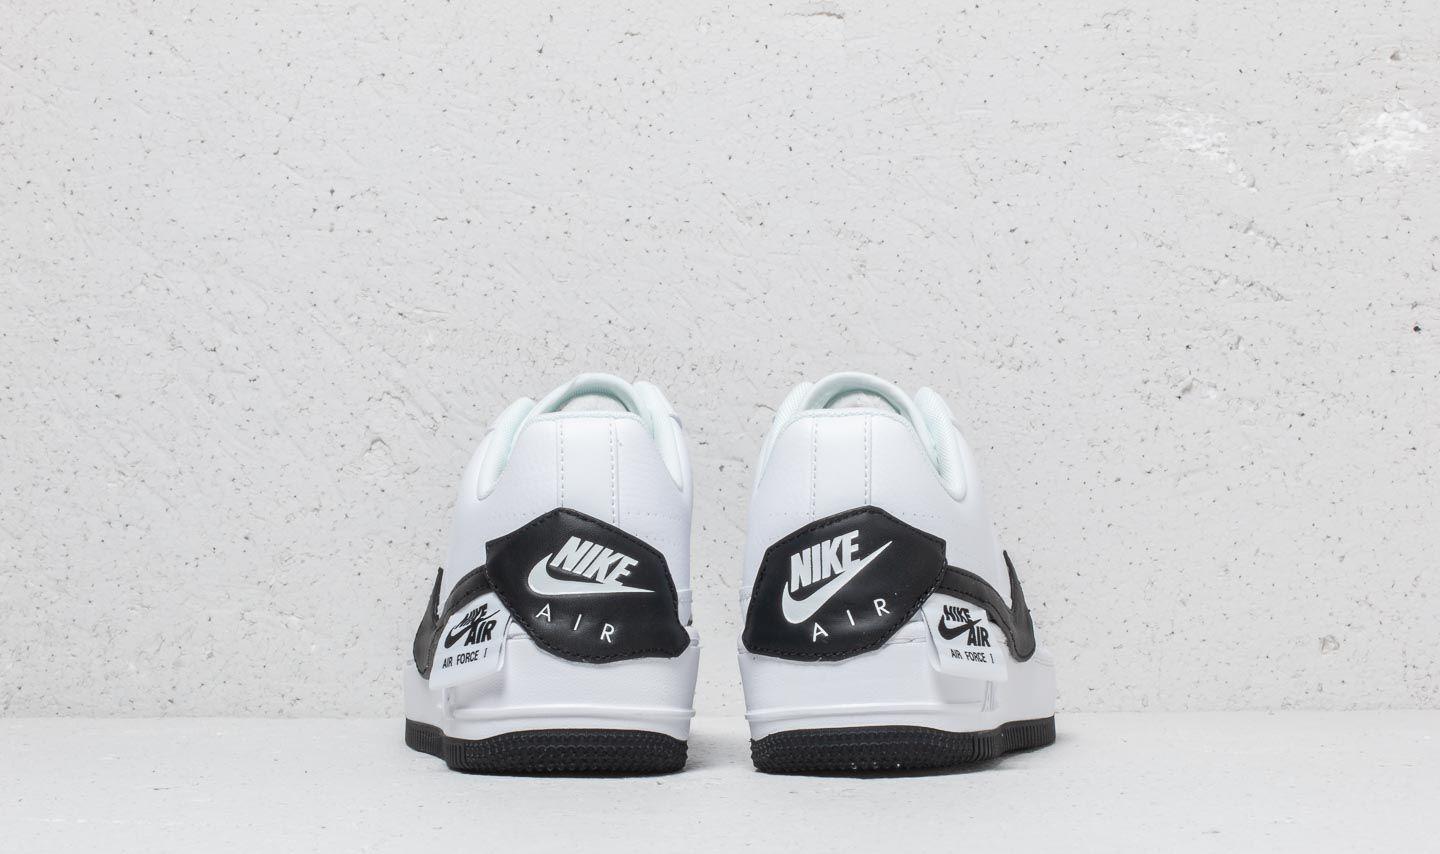 Nike Leather Air Force 1 Jester Casual Basketball Shoes in White/Black  (White) | Lyst